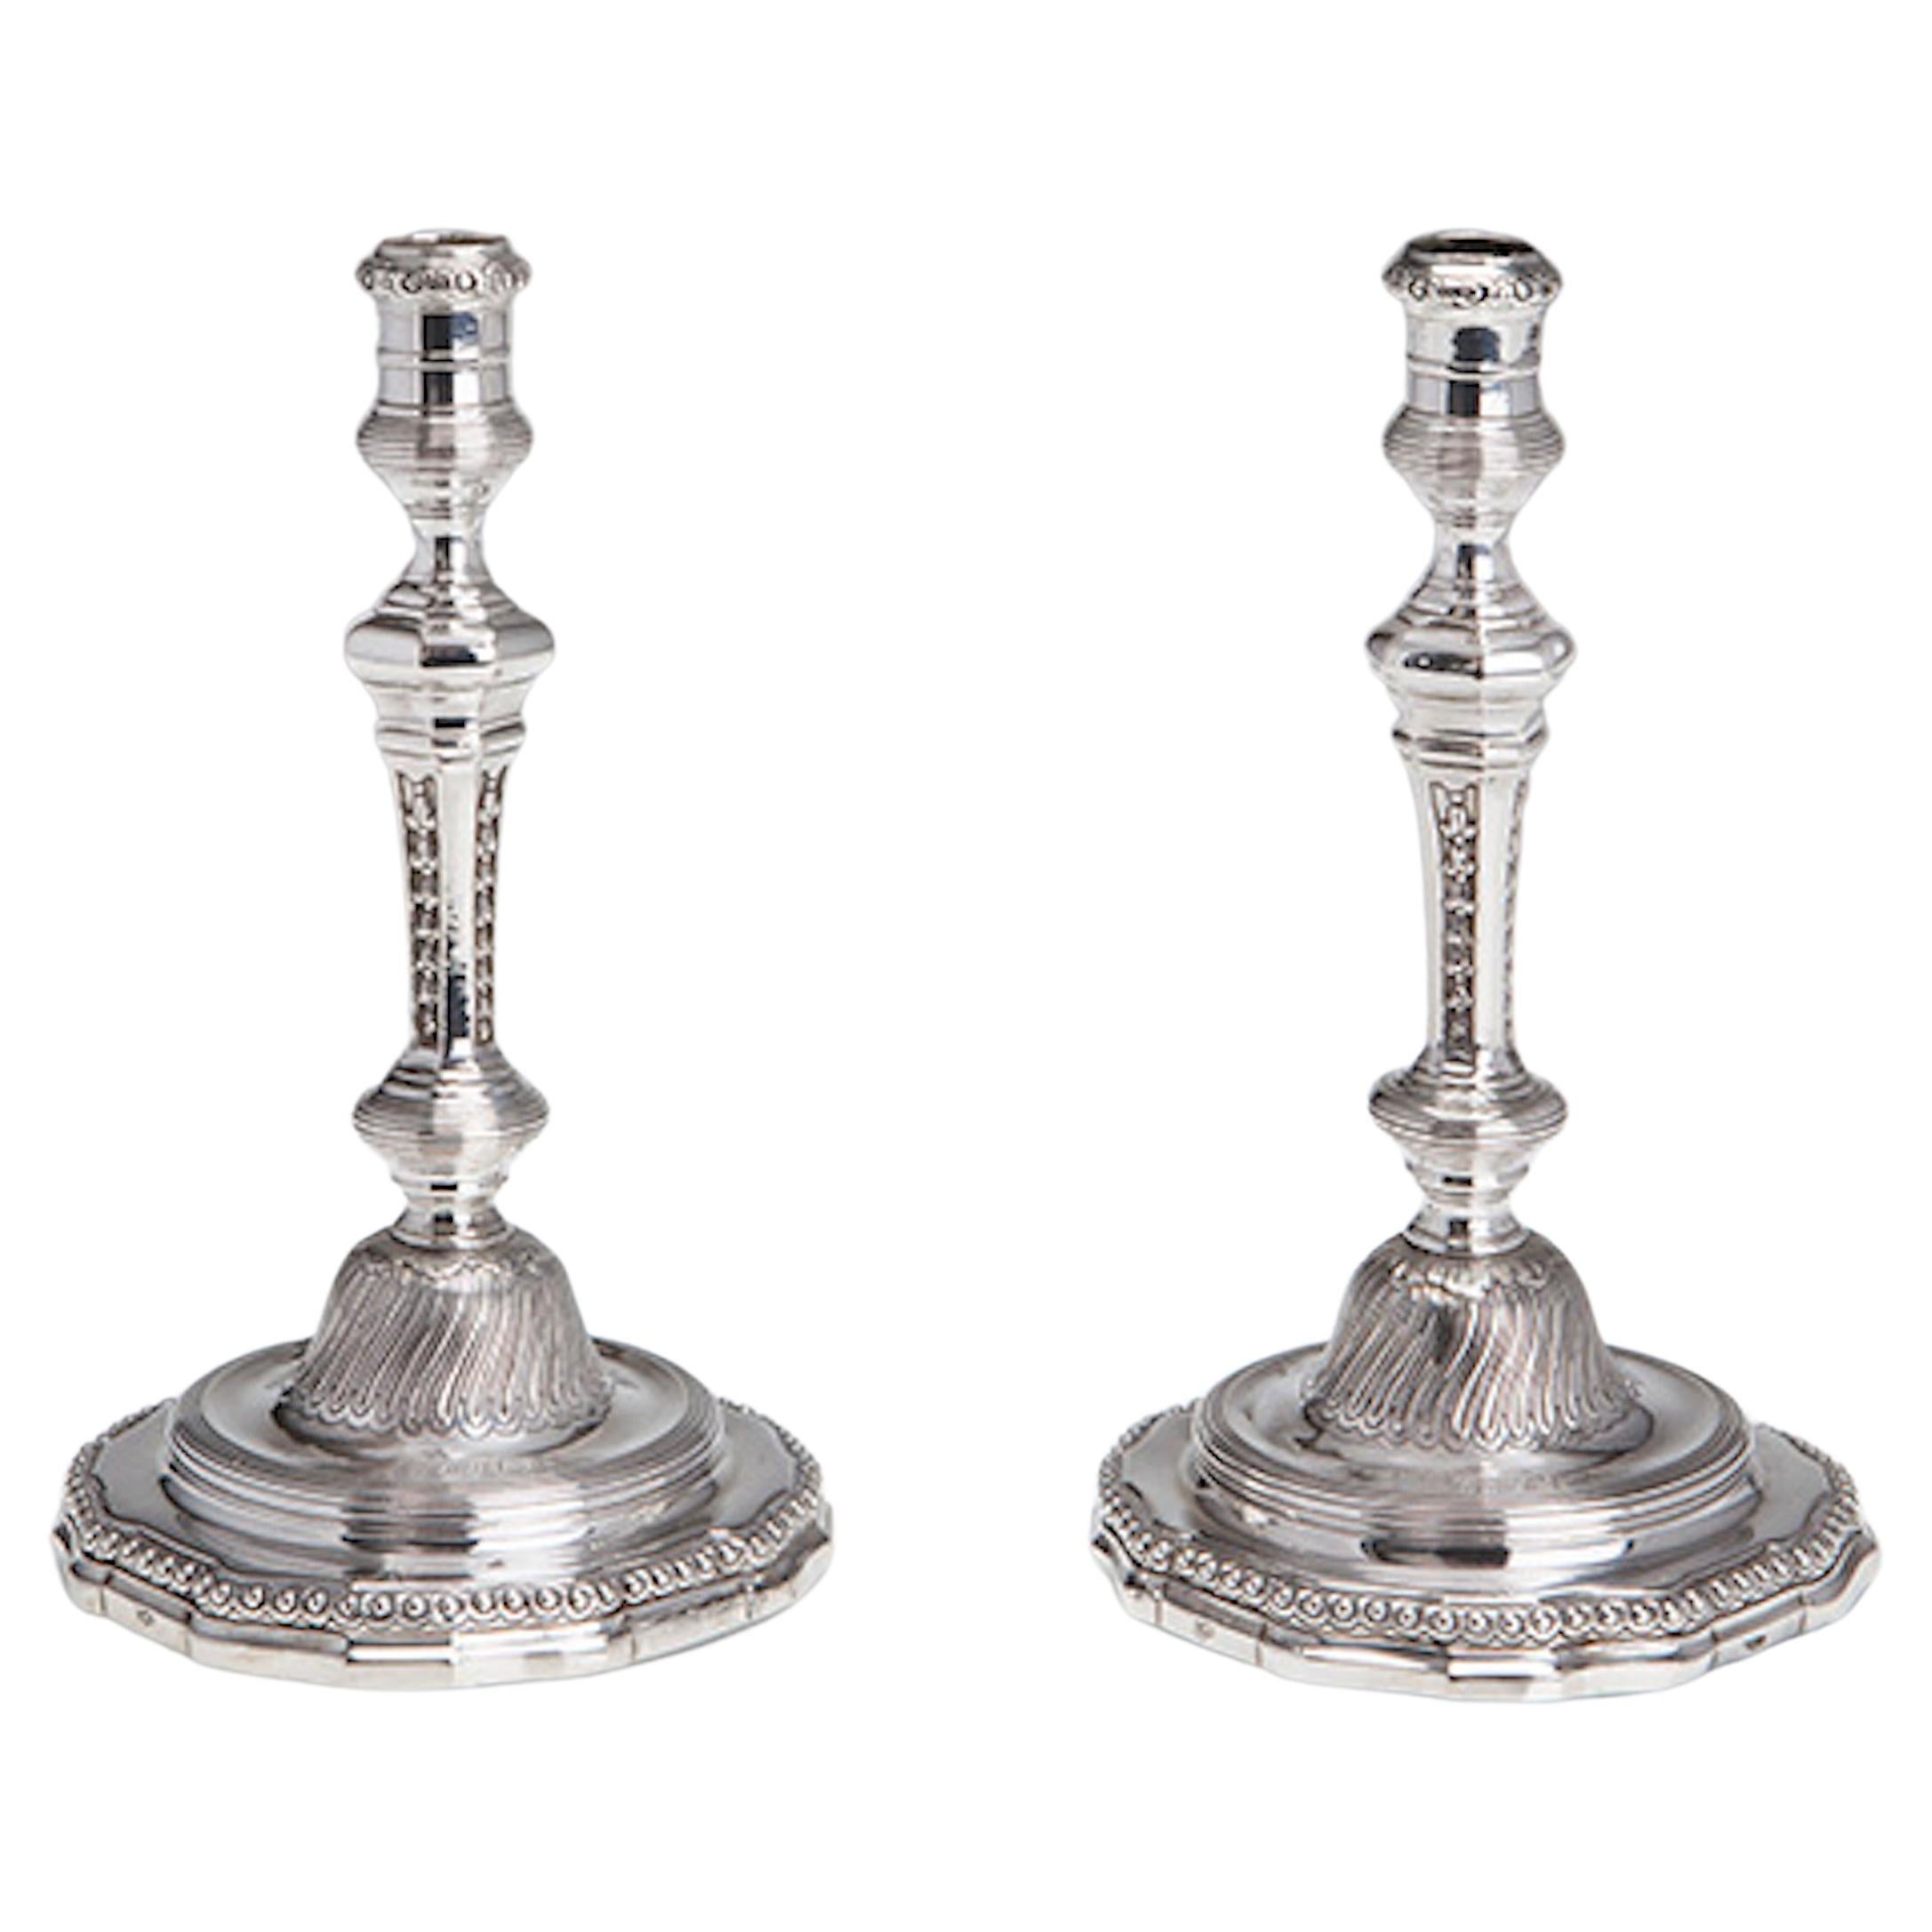 German Candlesticks from the Middle of the 18th Century with Marks